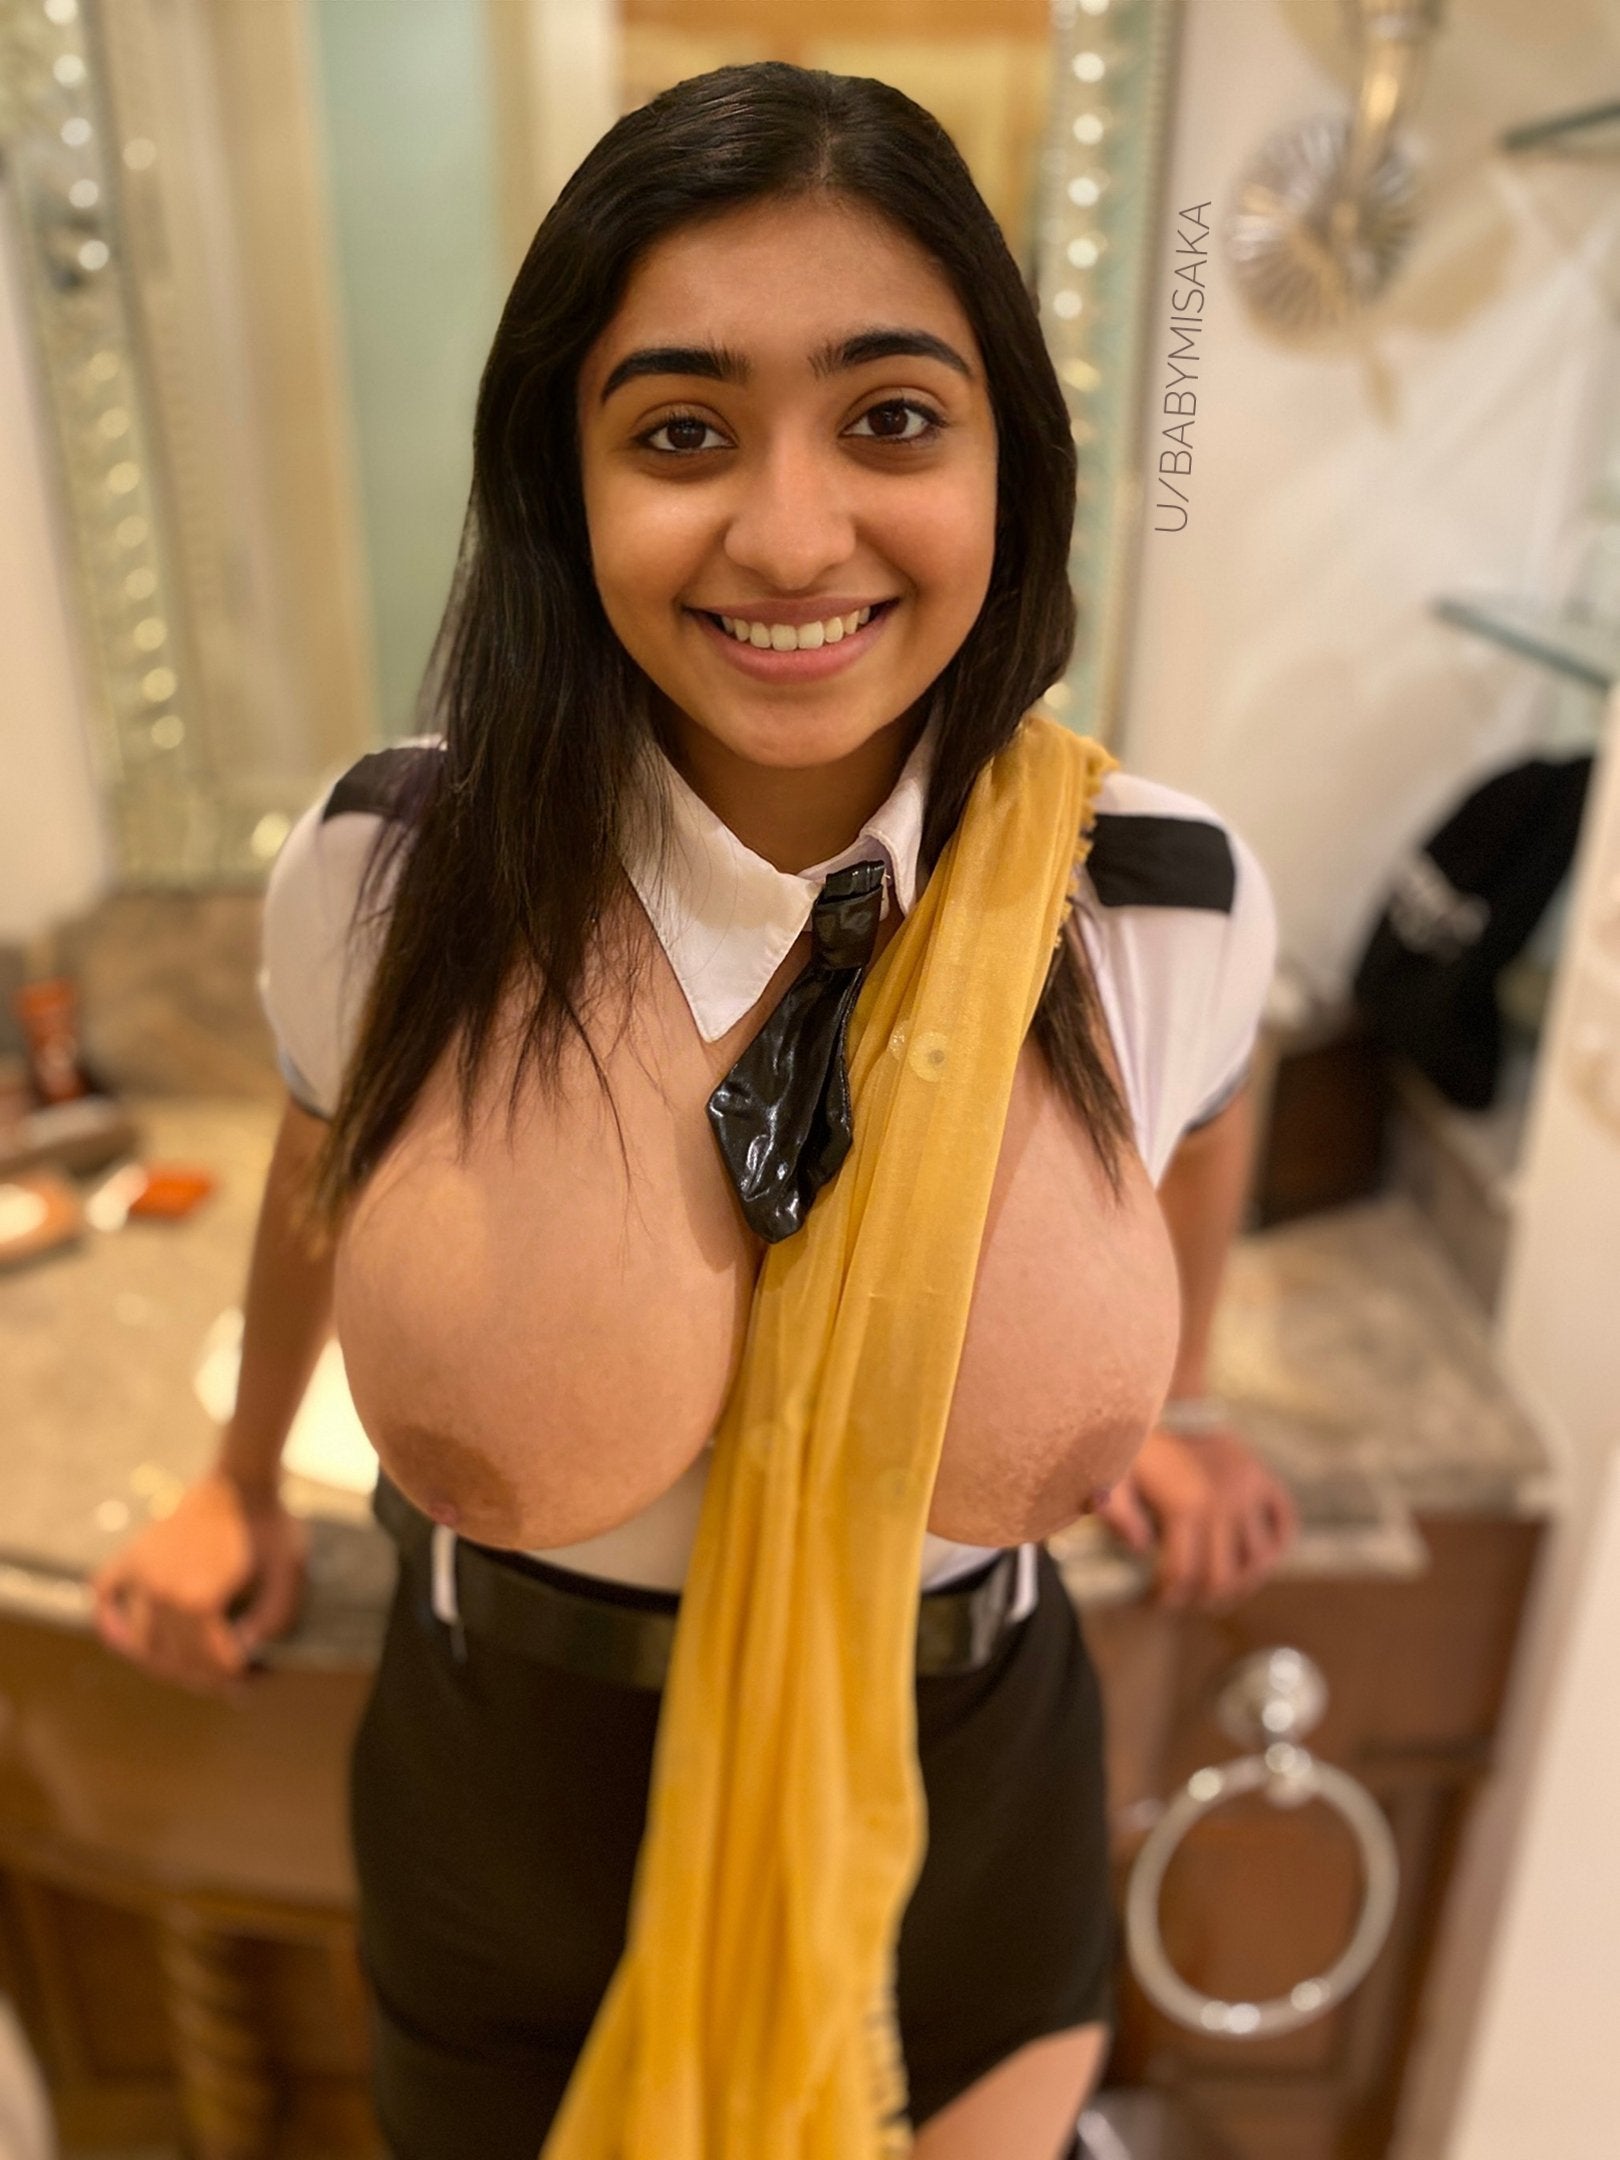 404porn - Can I be your air hostess? [F] title=